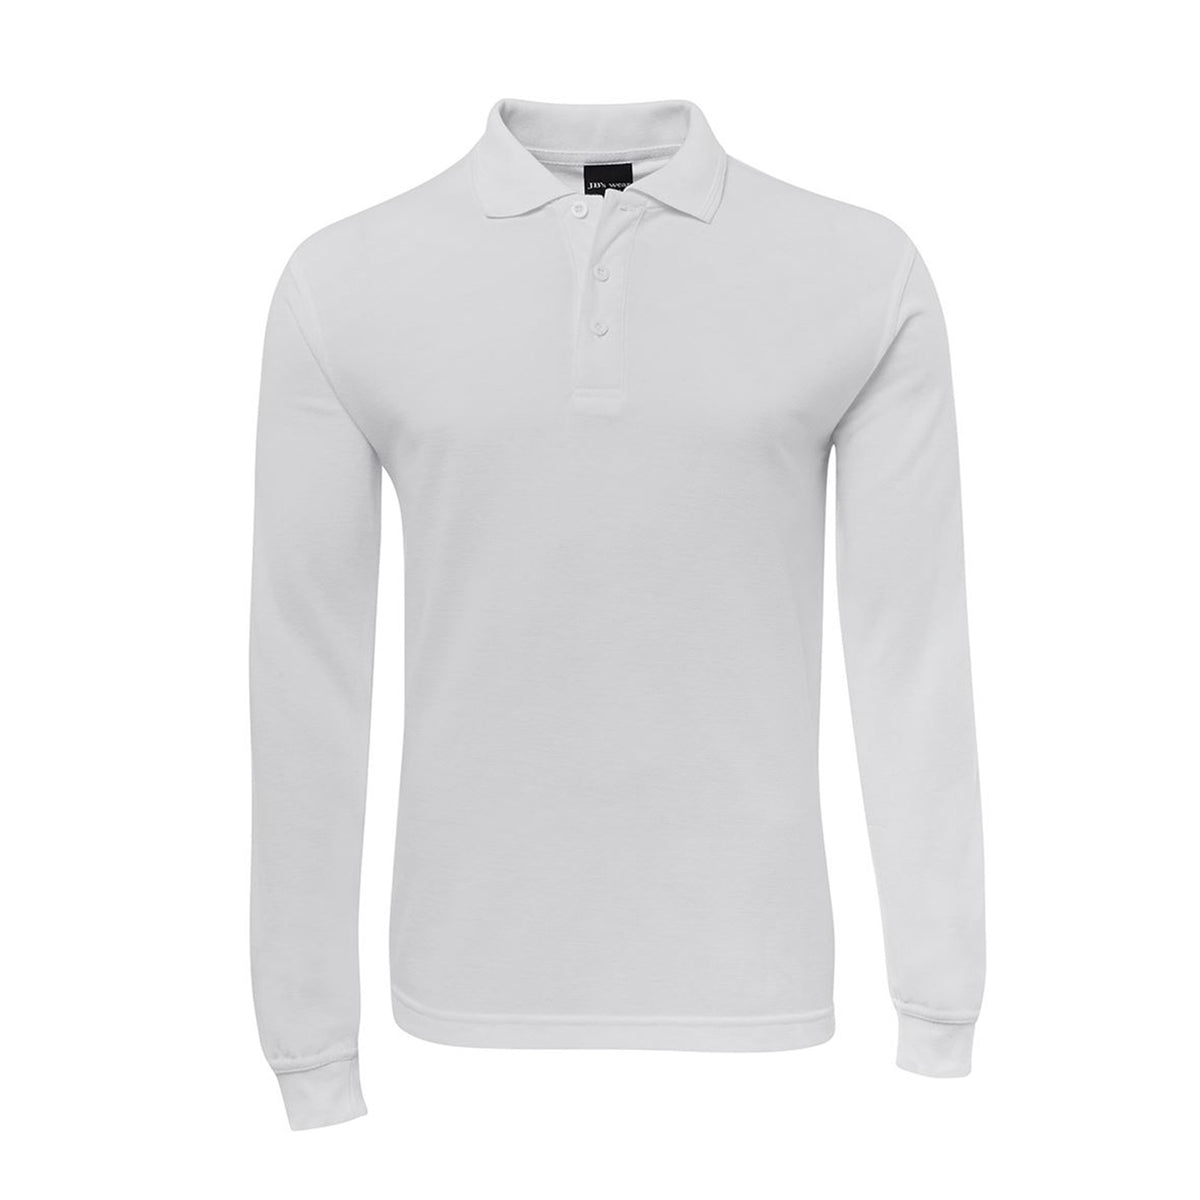 front of white long sleeve polo